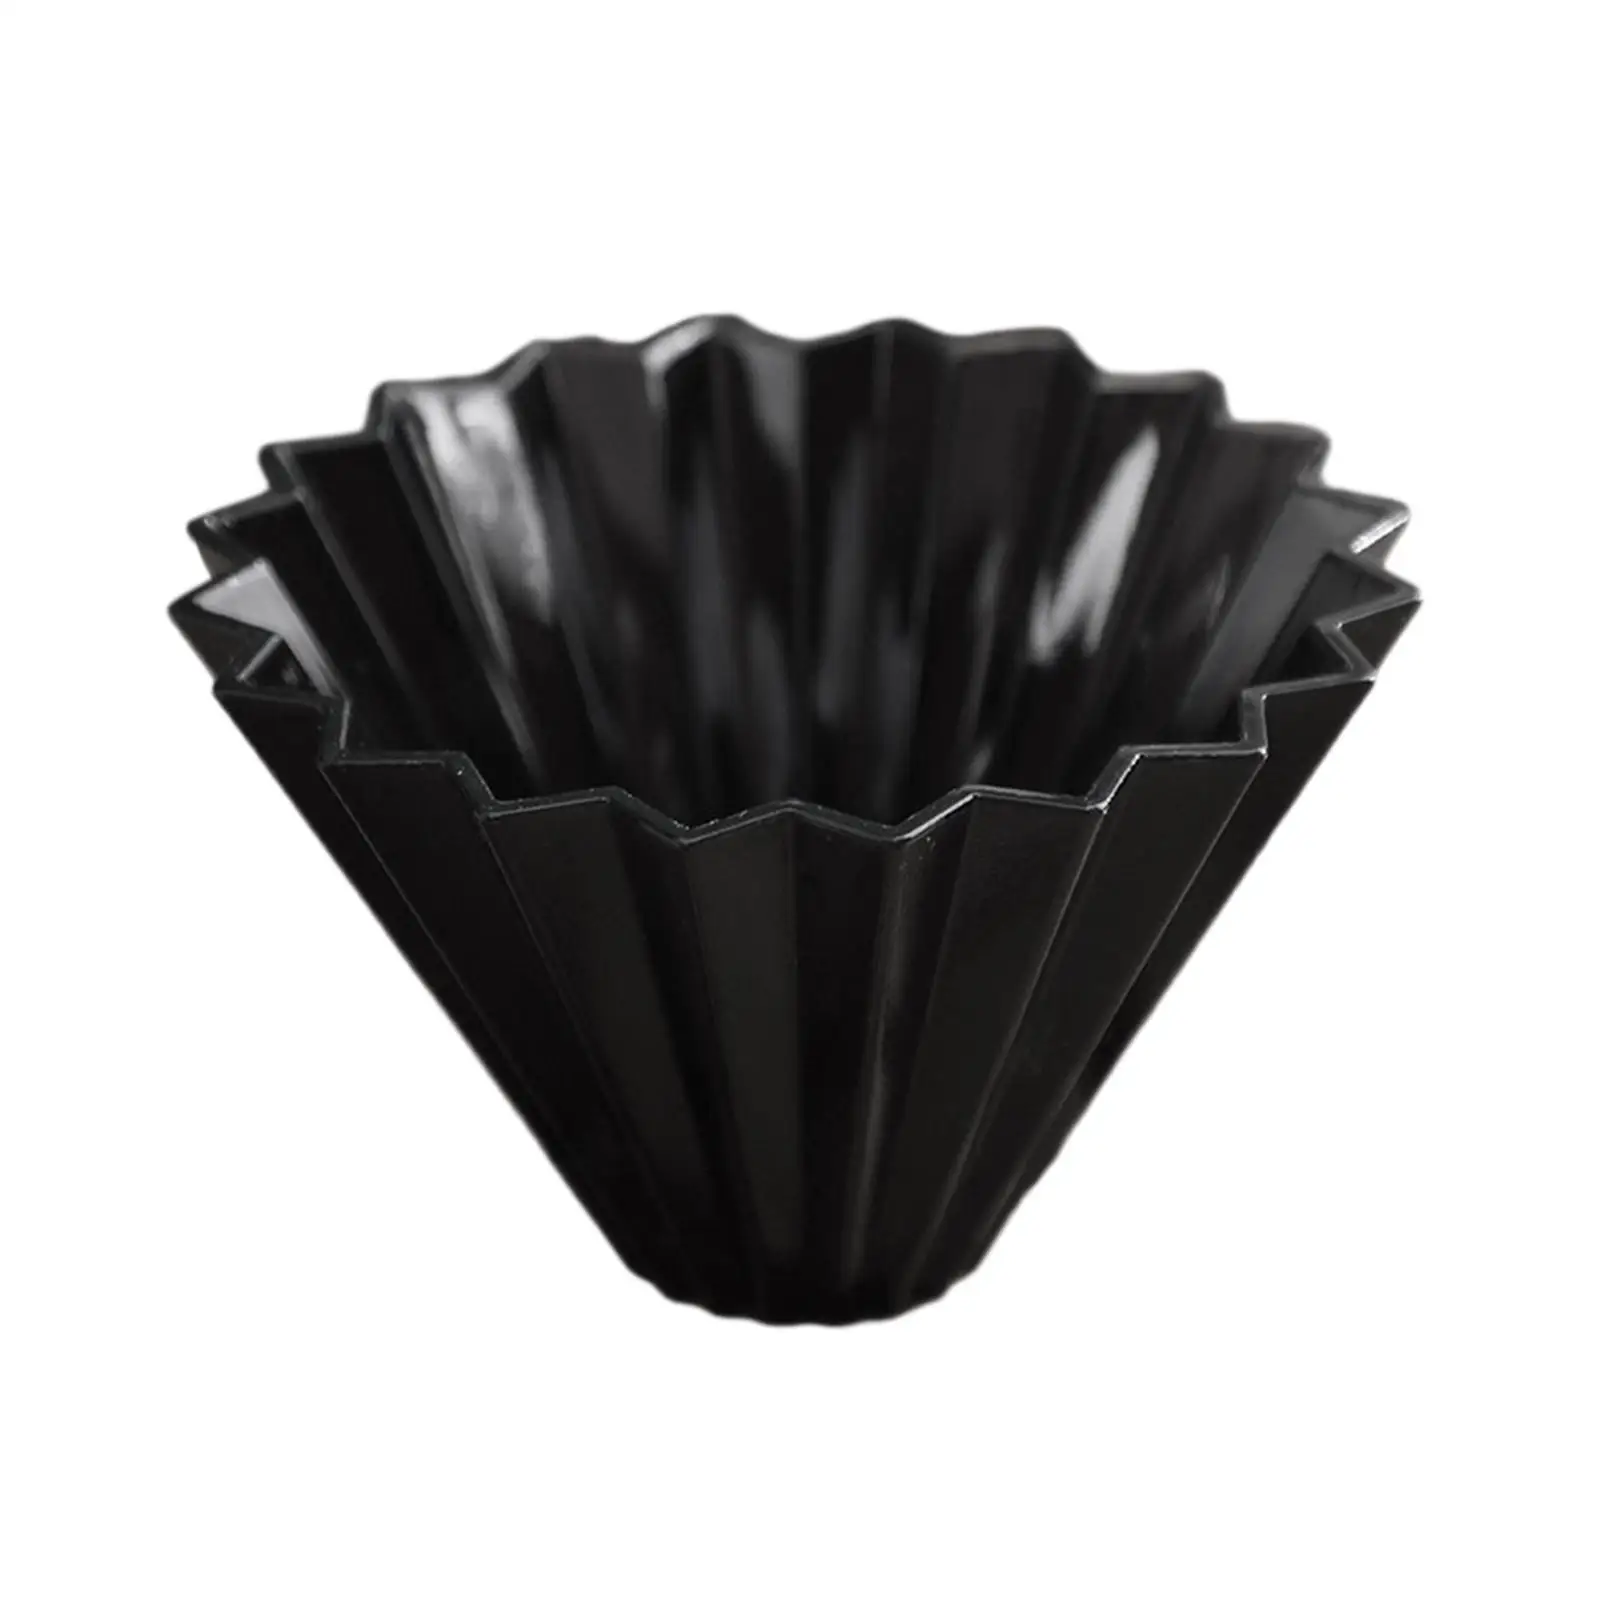 Pour over Coffee Filter Portable for Single Cup Brew Coffee Filter Cone for Home Restaurant Kitchen Coffee Lovers Gifts